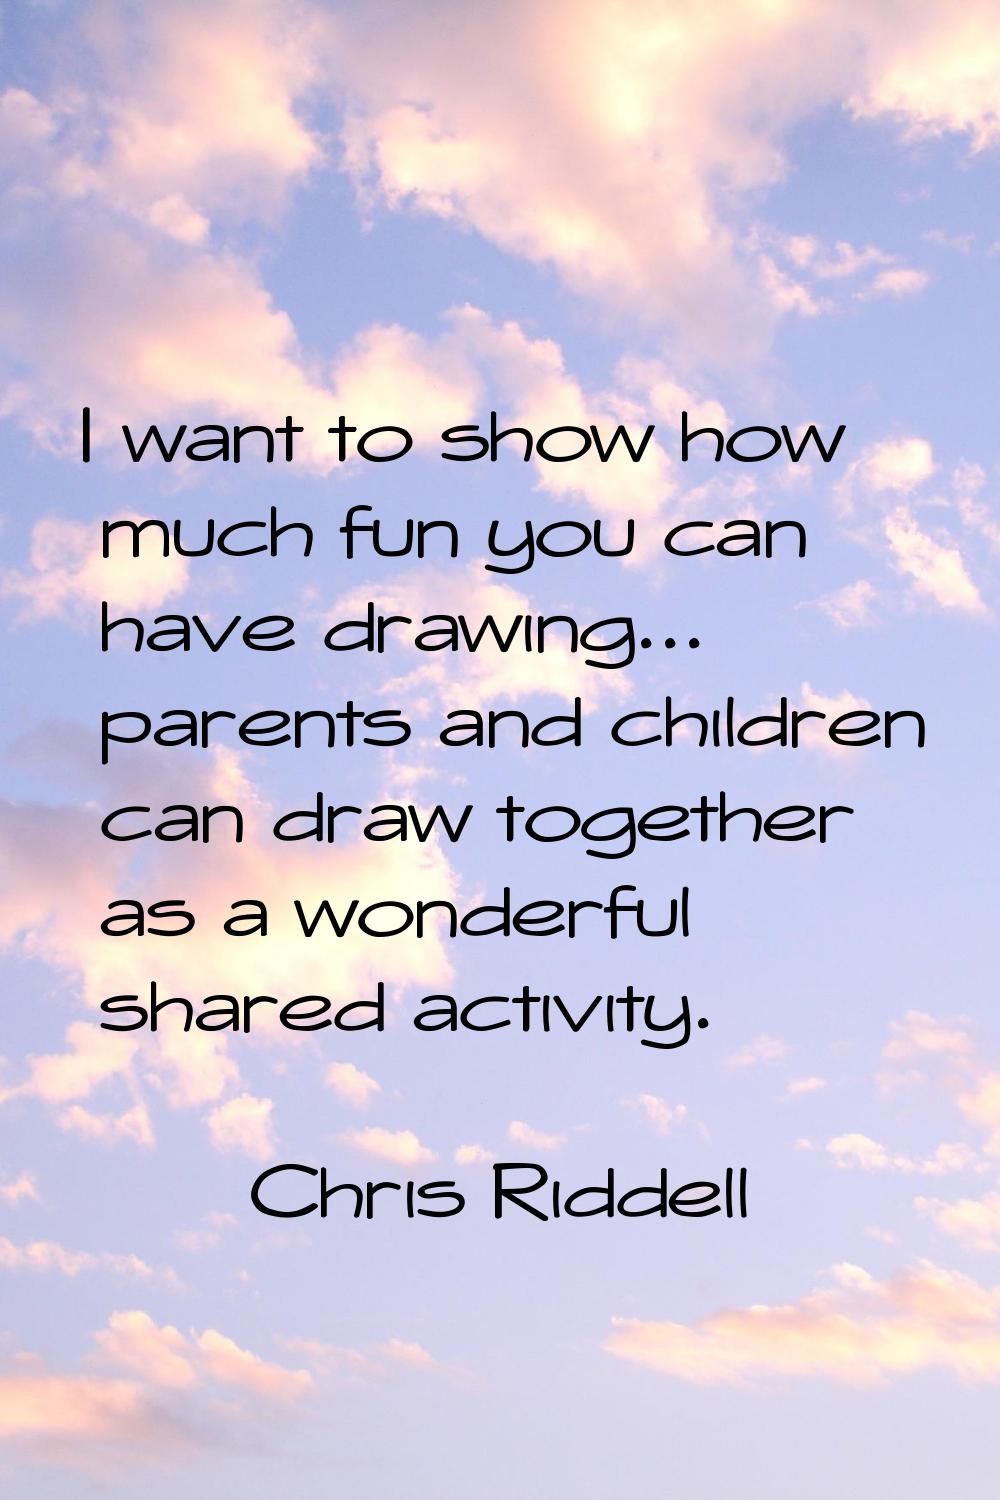 I want to show how much fun you can have drawing... parents and children can draw together as a won